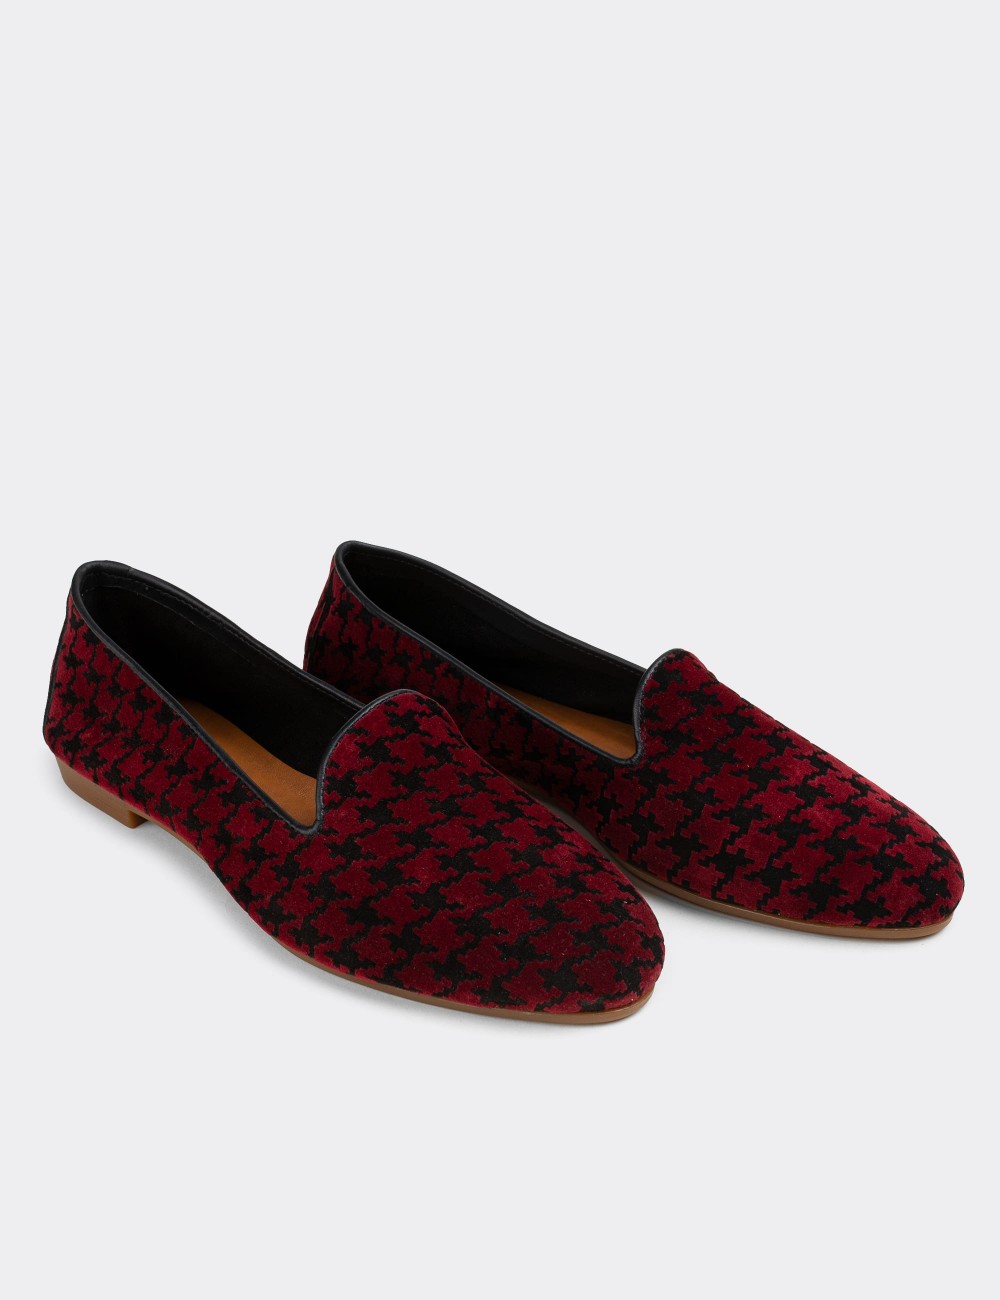 Burgundy Suede Leather Loafers  - E3208ZBRDC01